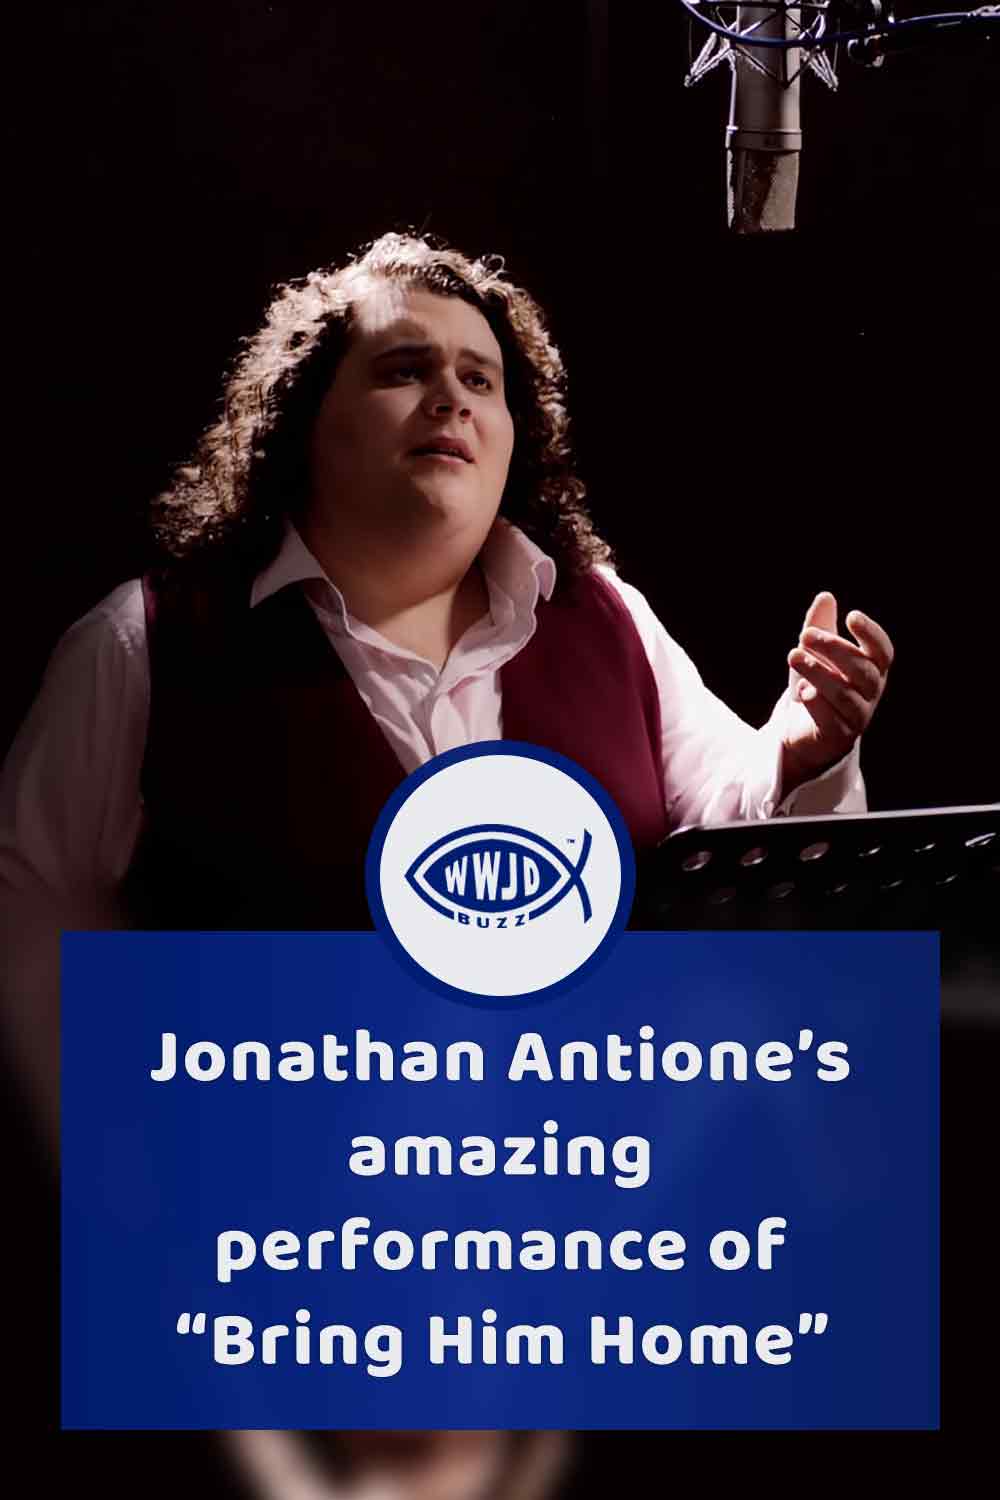 Jonathan Antione’s amazing performance of “Bring Him Home”